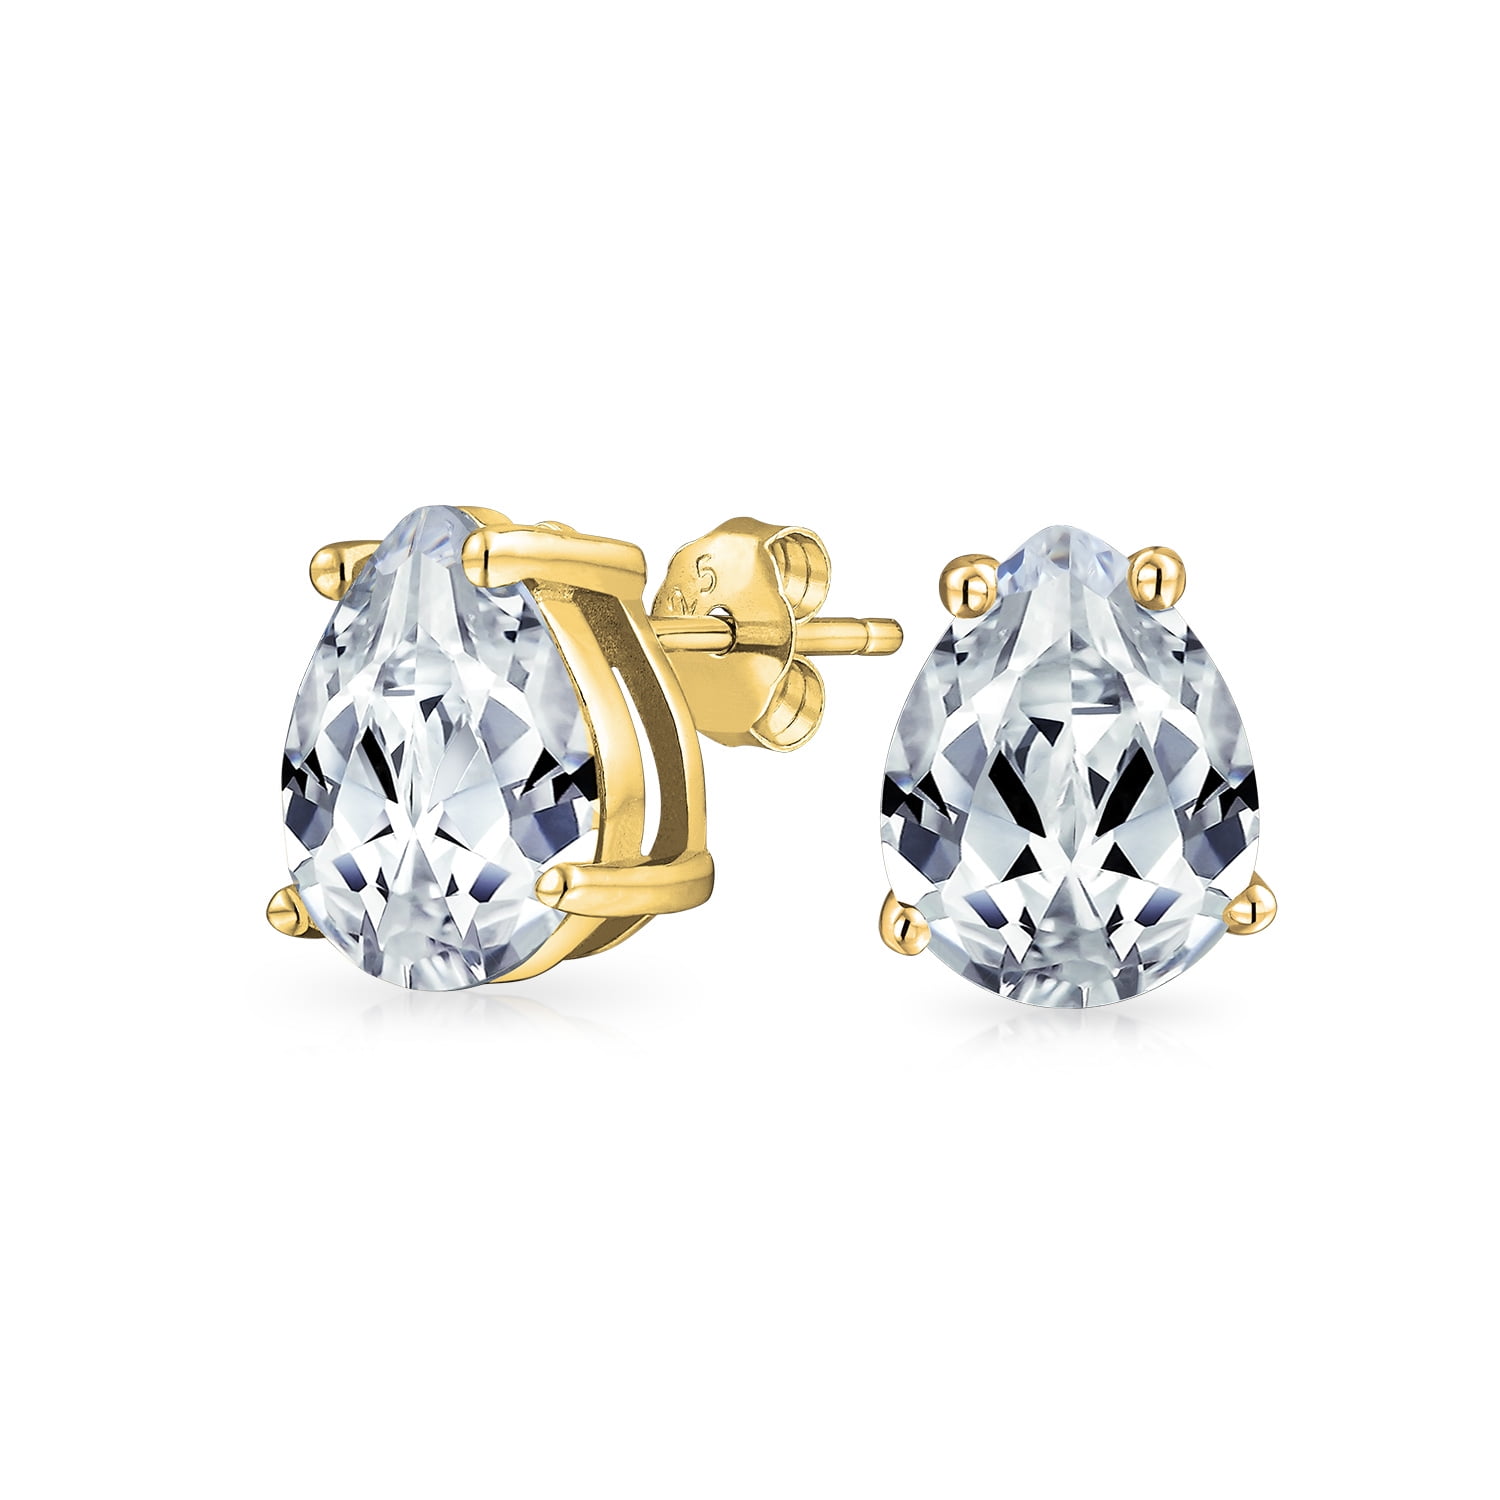 Pear Cubic Zirconia Ear Studs 925 Sterling Silver With Handmade Prong Setting For Women and Girls